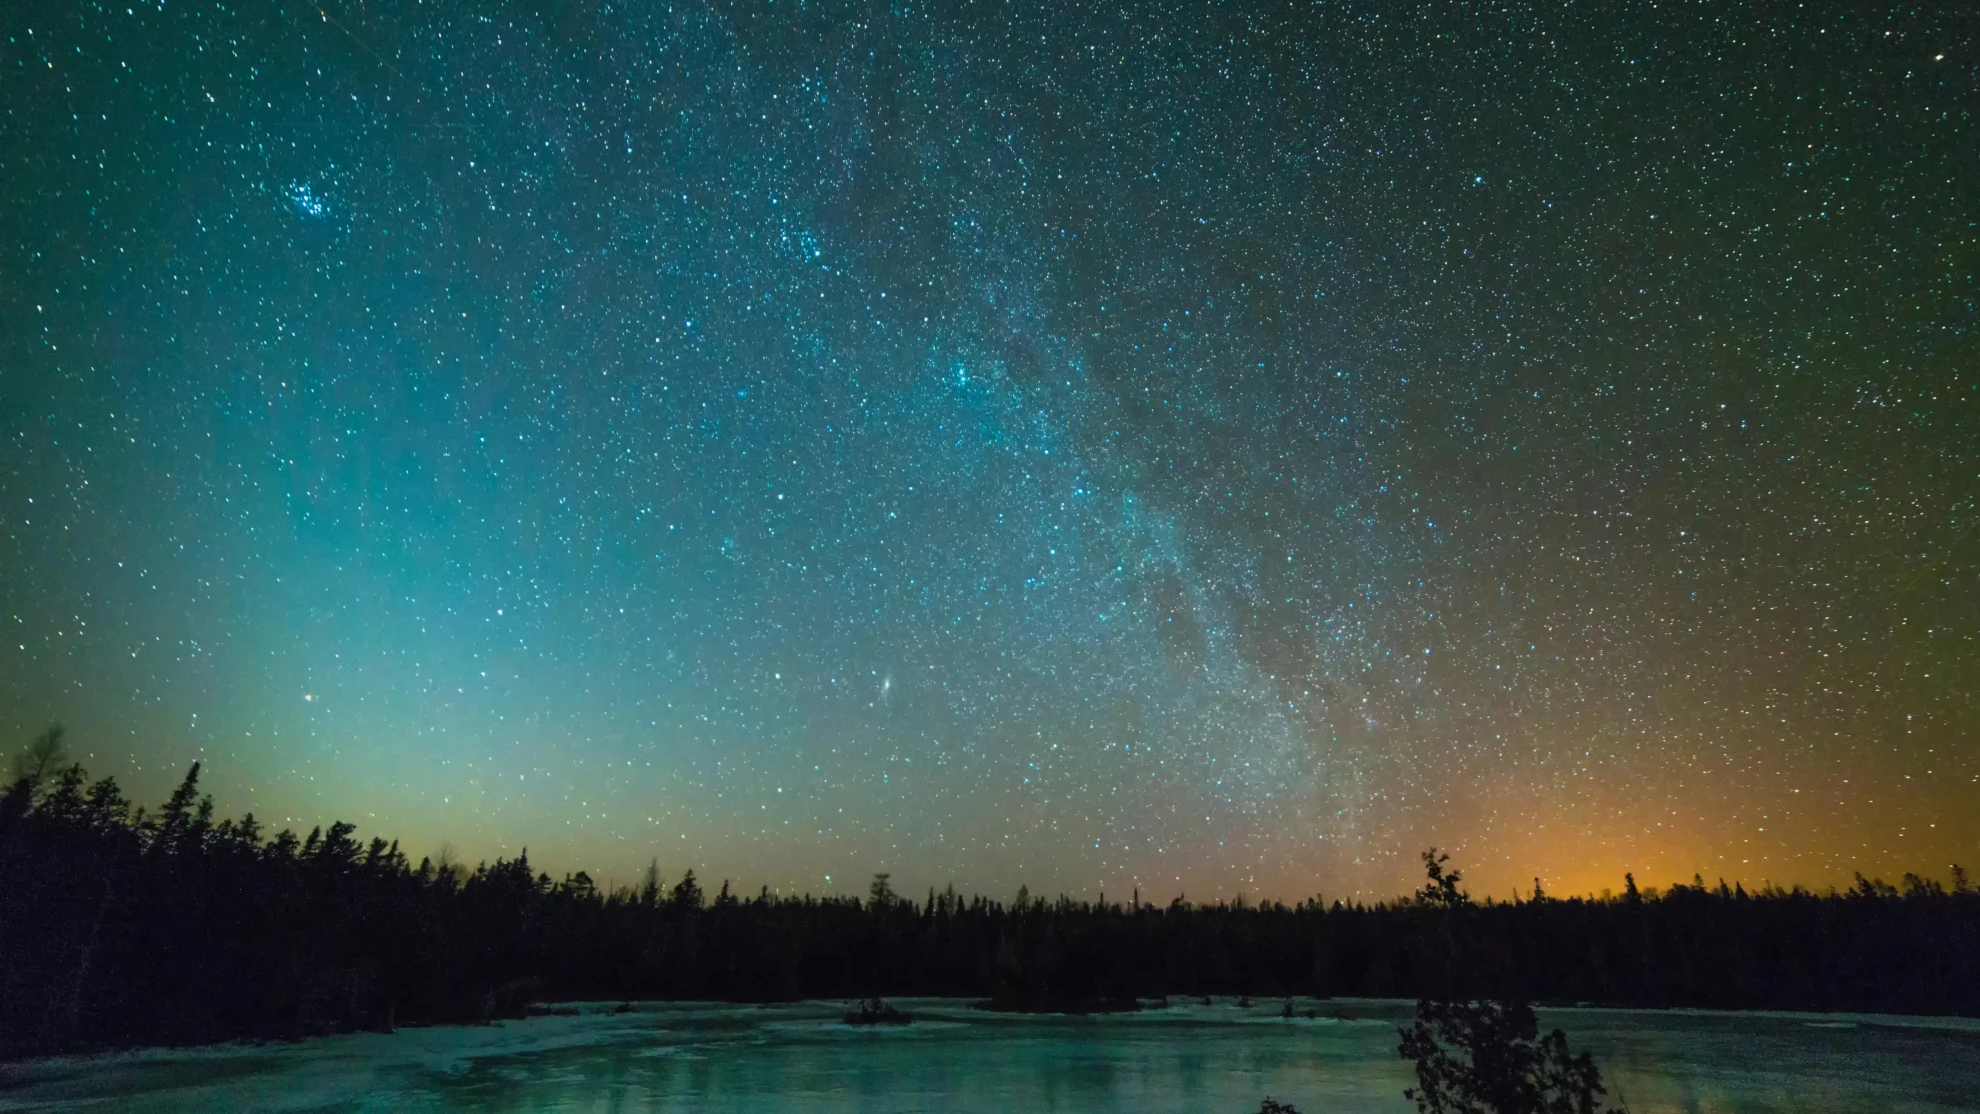 Winter 2023-2024 could be best in years for observing the night sky